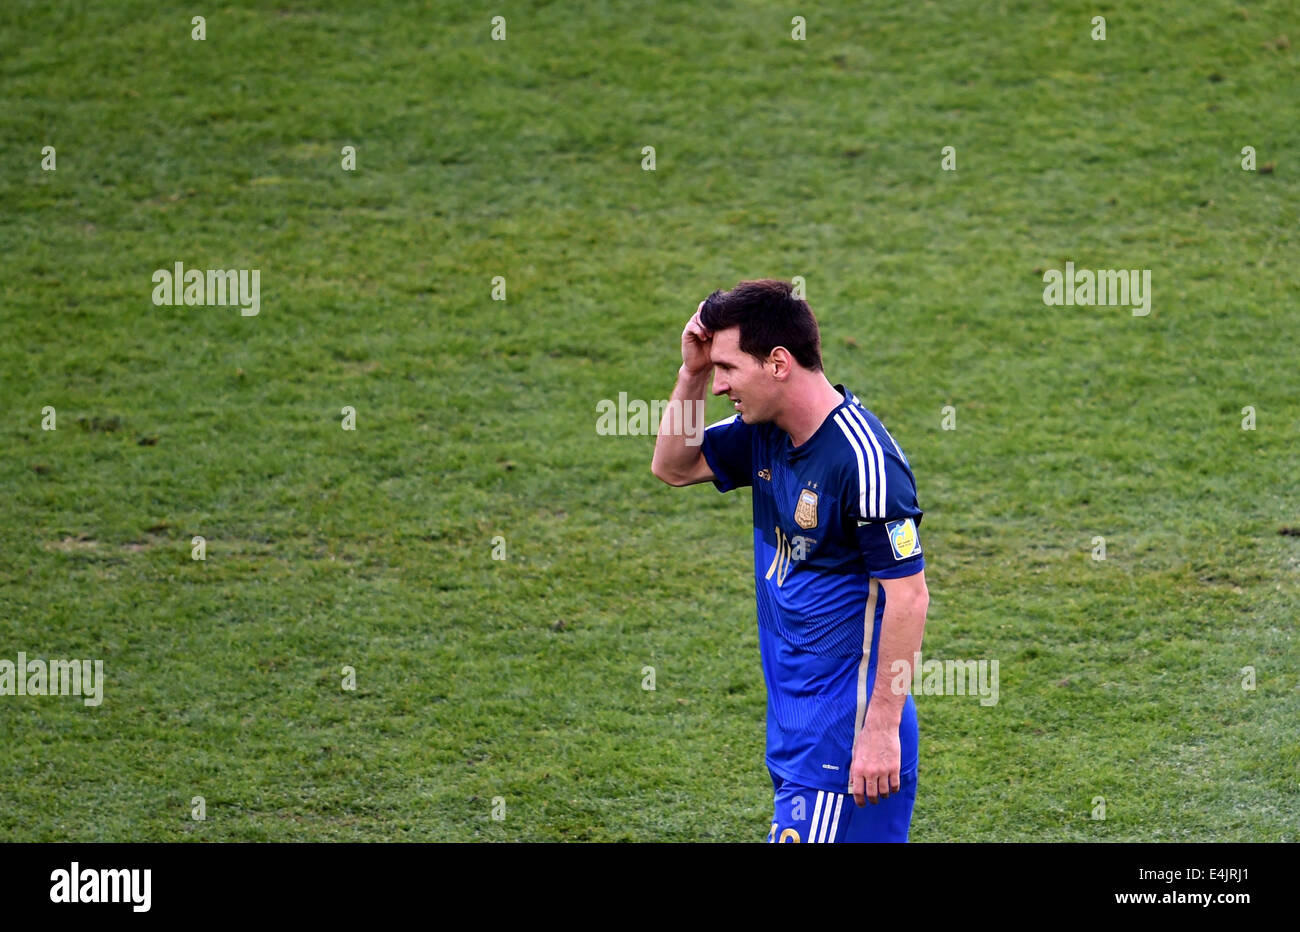 Rio De Janeiro, Brazil. 13th July, 2014. Argentina's Lionel Messi reacts during the final match between Germany and Argentina of 2014 FIFA World Cup at the Estadio do Maracana Stadium in Rio de Janeiro, Brazil, on July 13, 2014. Credit:  Li Ga/Xinhua/Alamy Live News Stock Photo